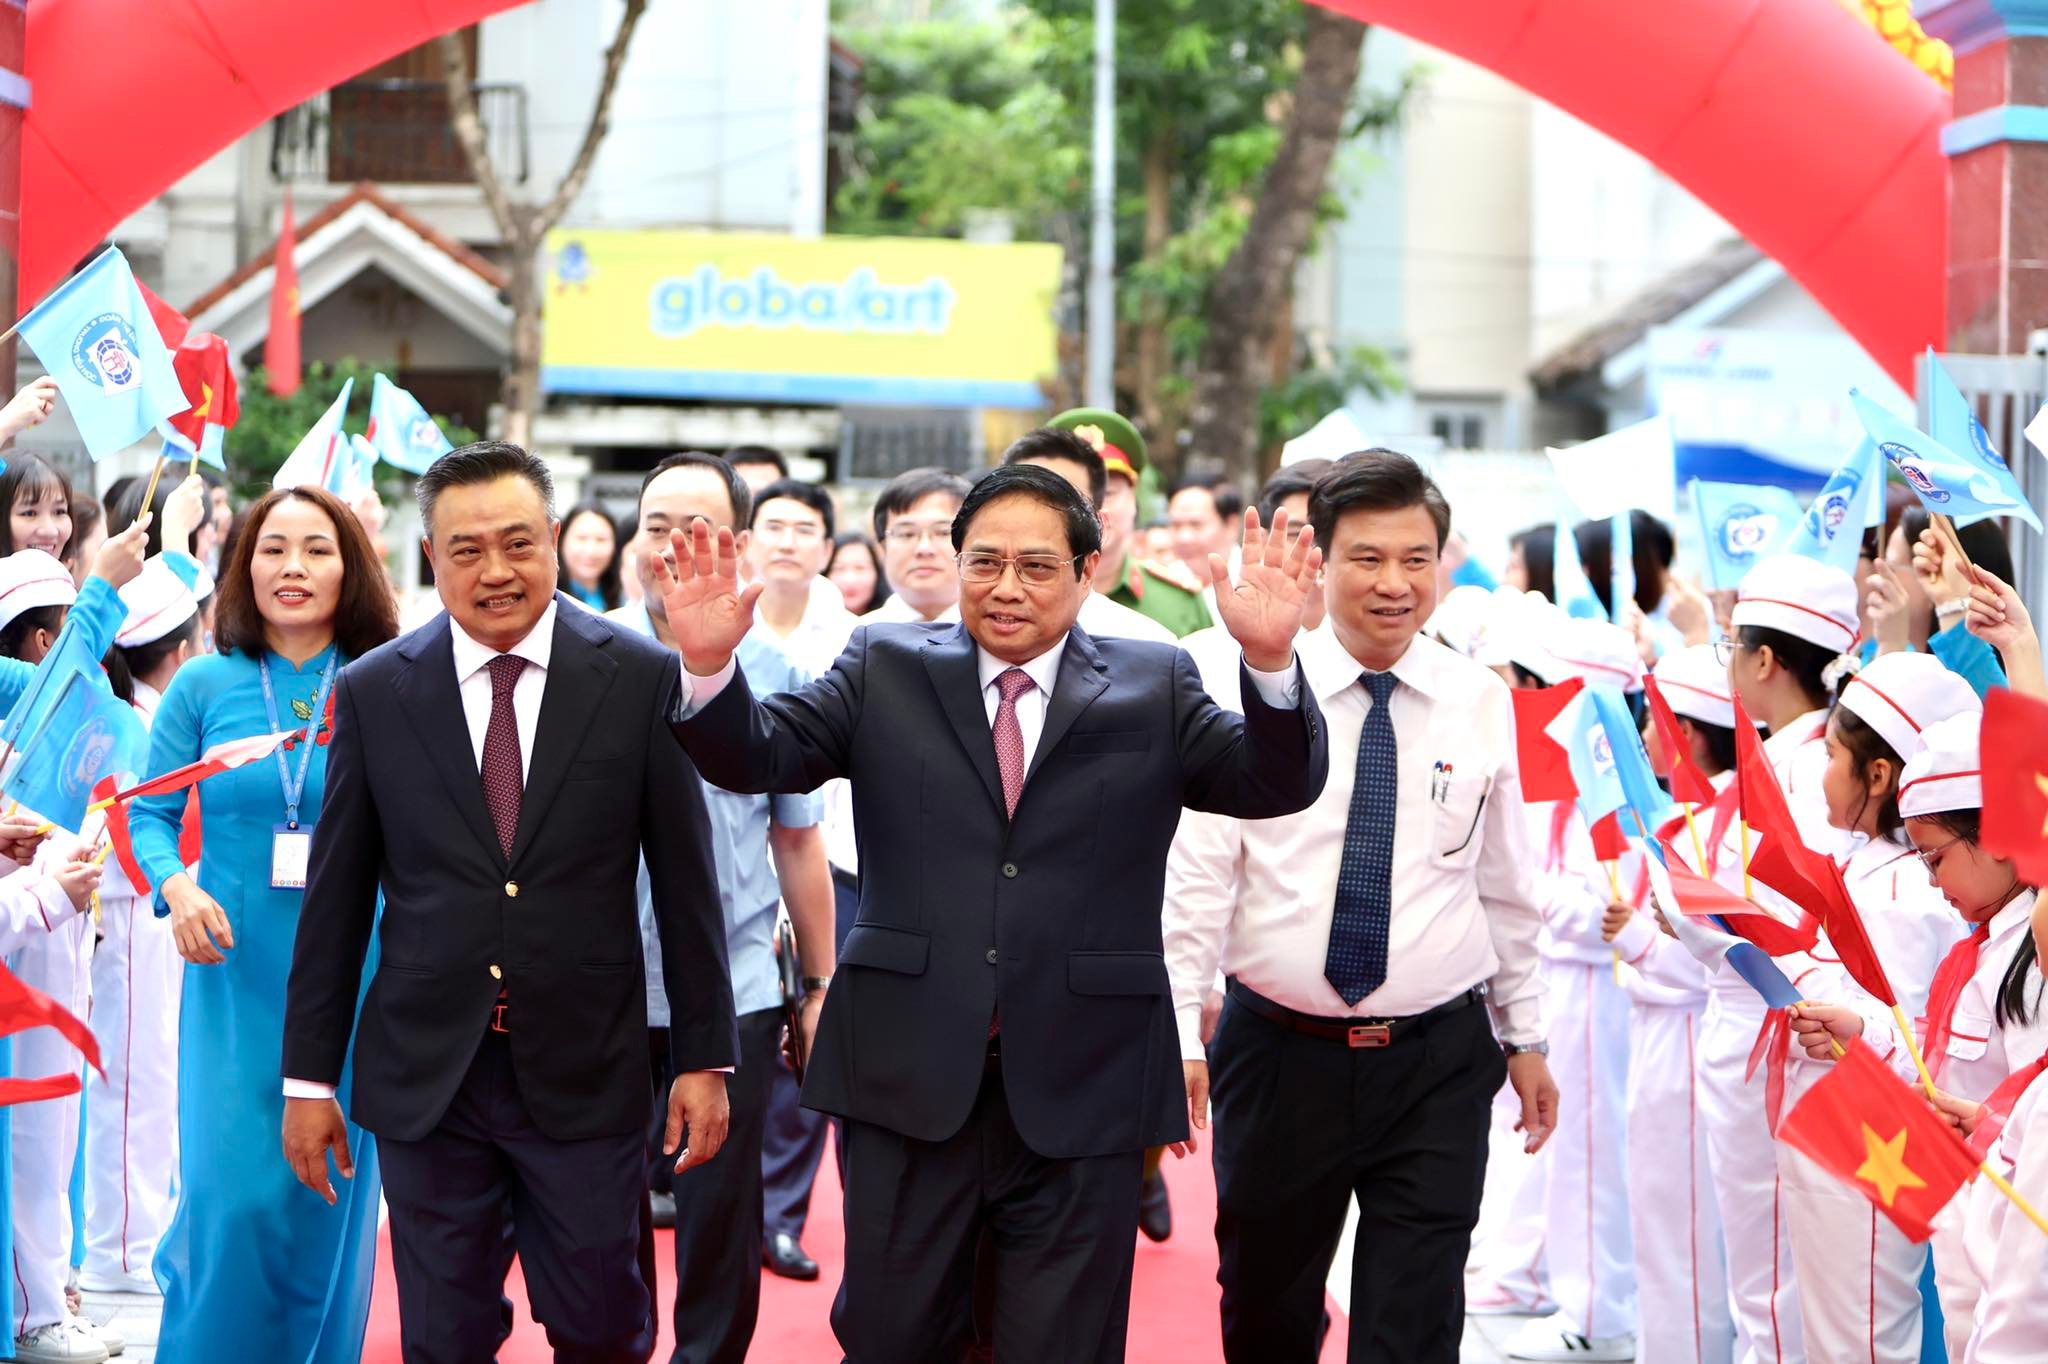 Prime Minister Pham Minh Chinh (C) arrives at the school opening ceremony at Doan Thi Diem Elementary School in Hanoi, September 5, 2022. Photo: Nguyen Khanh / Tuoi Tre